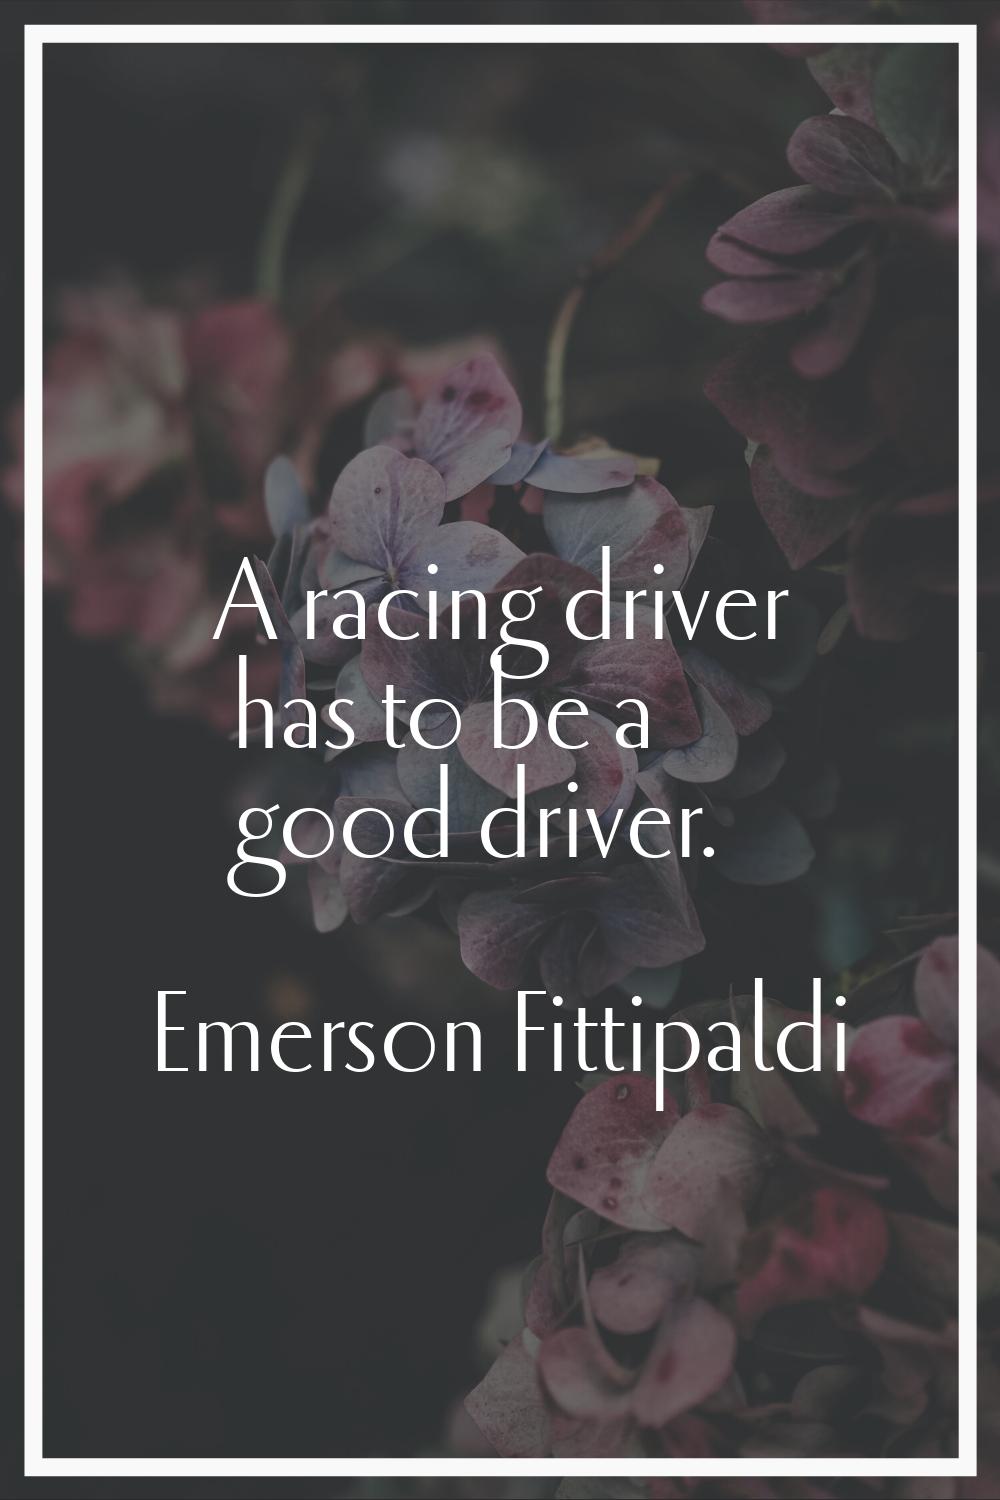 A racing driver has to be a good driver.